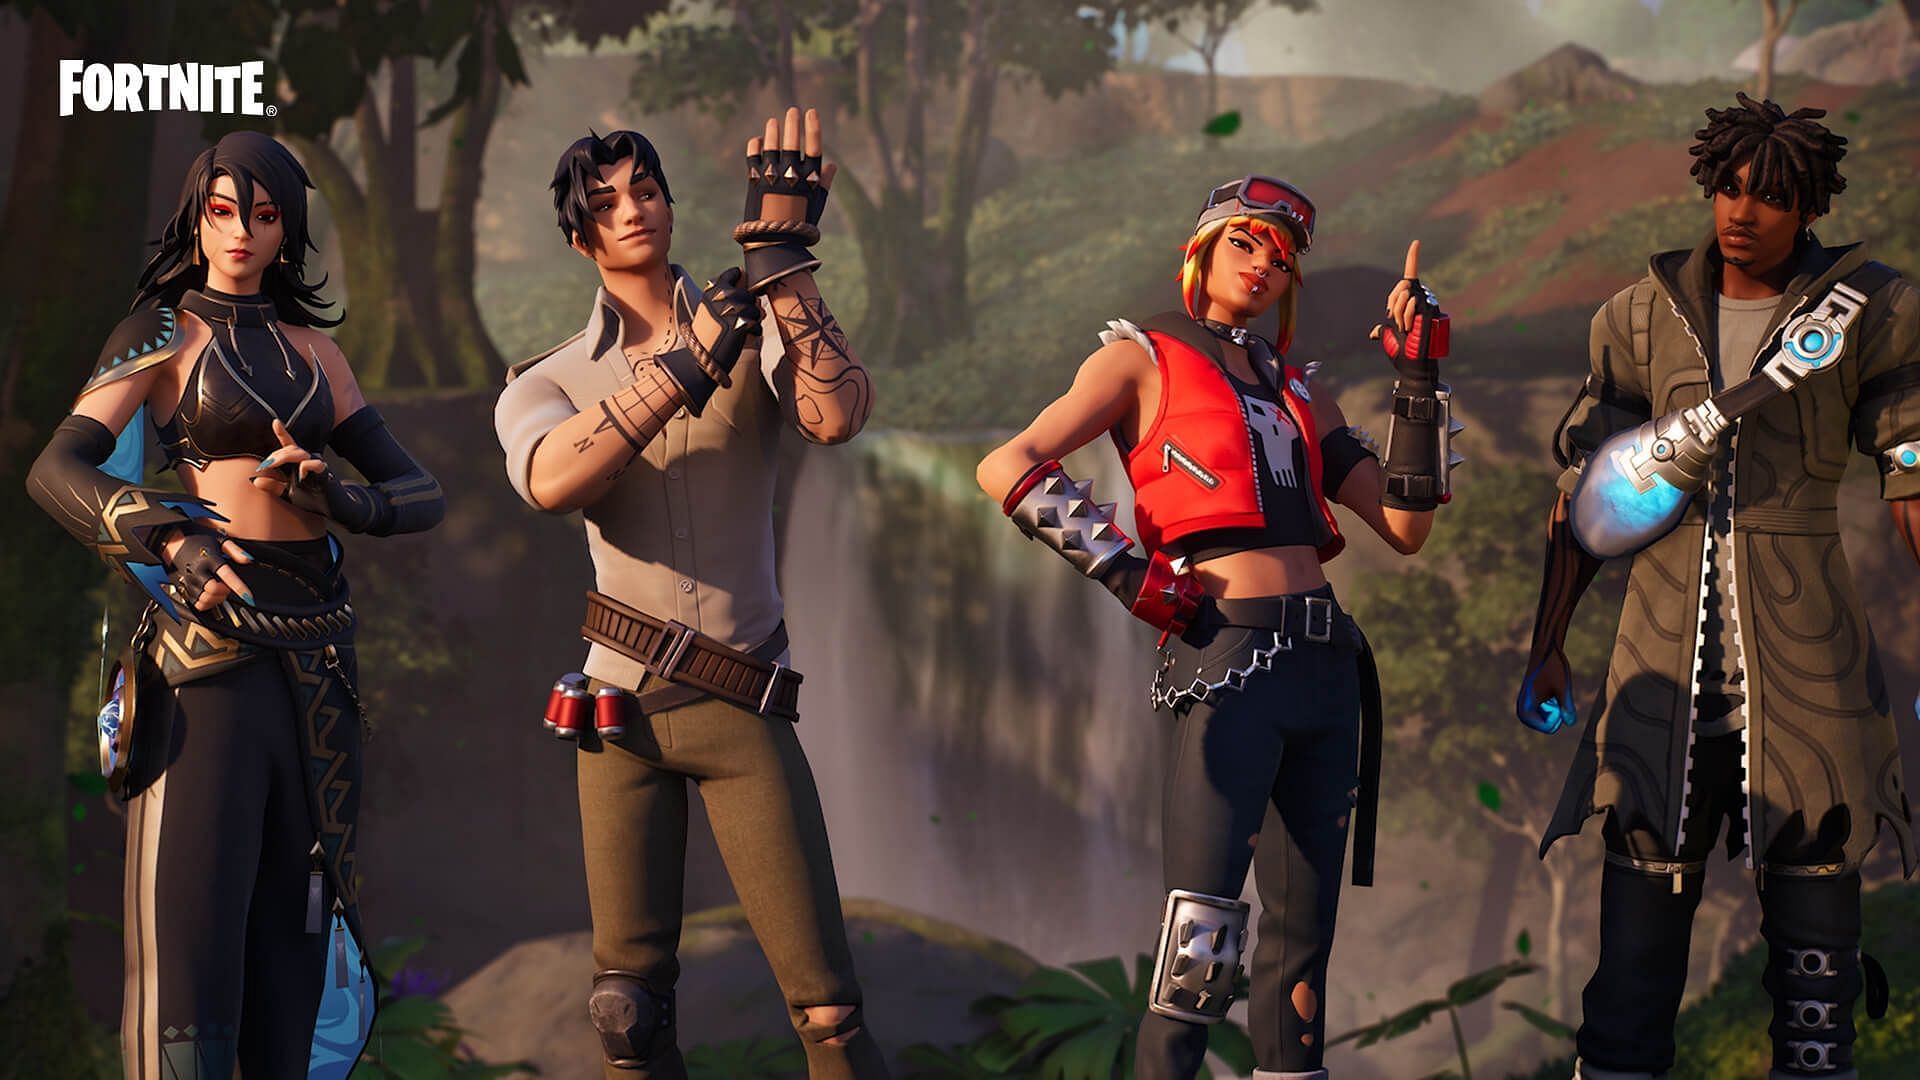 Battle Pass skins require players to gain levels in the new Fortnite season (Image via Epic Games)